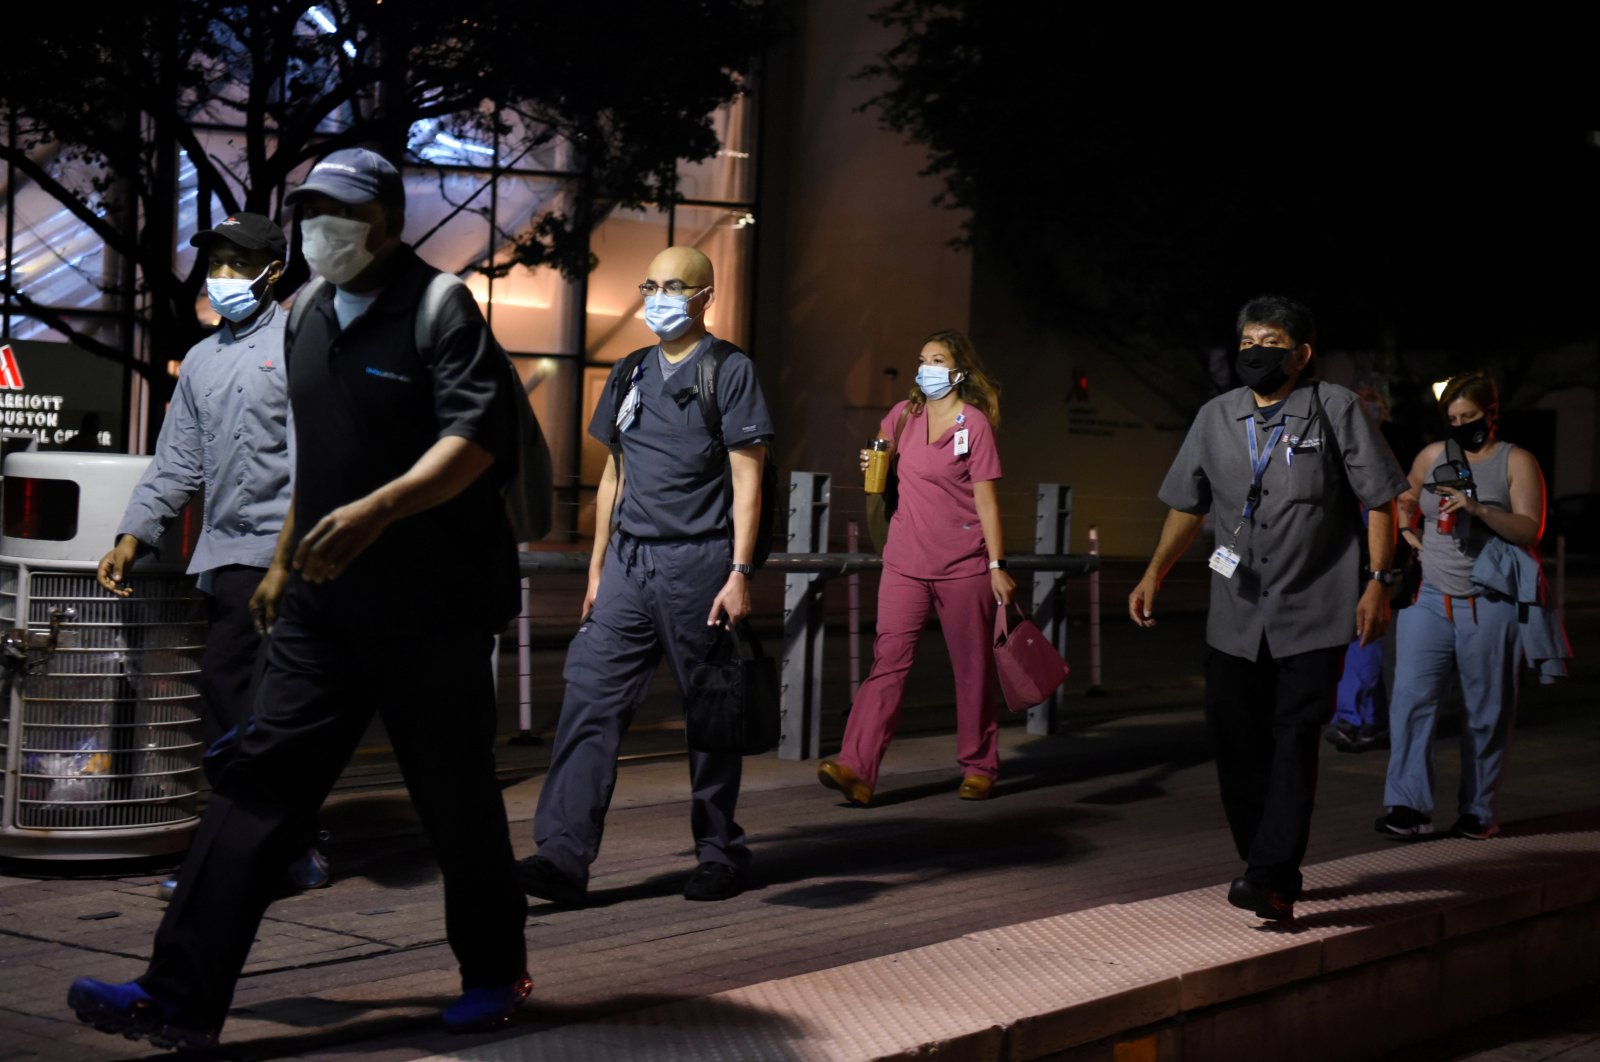 Health care workers walk through the Texas Medical Center during a shift change as cases of the coronavirus spike, Houston, Texas, July 8, 2020. (REUTERS Photo)